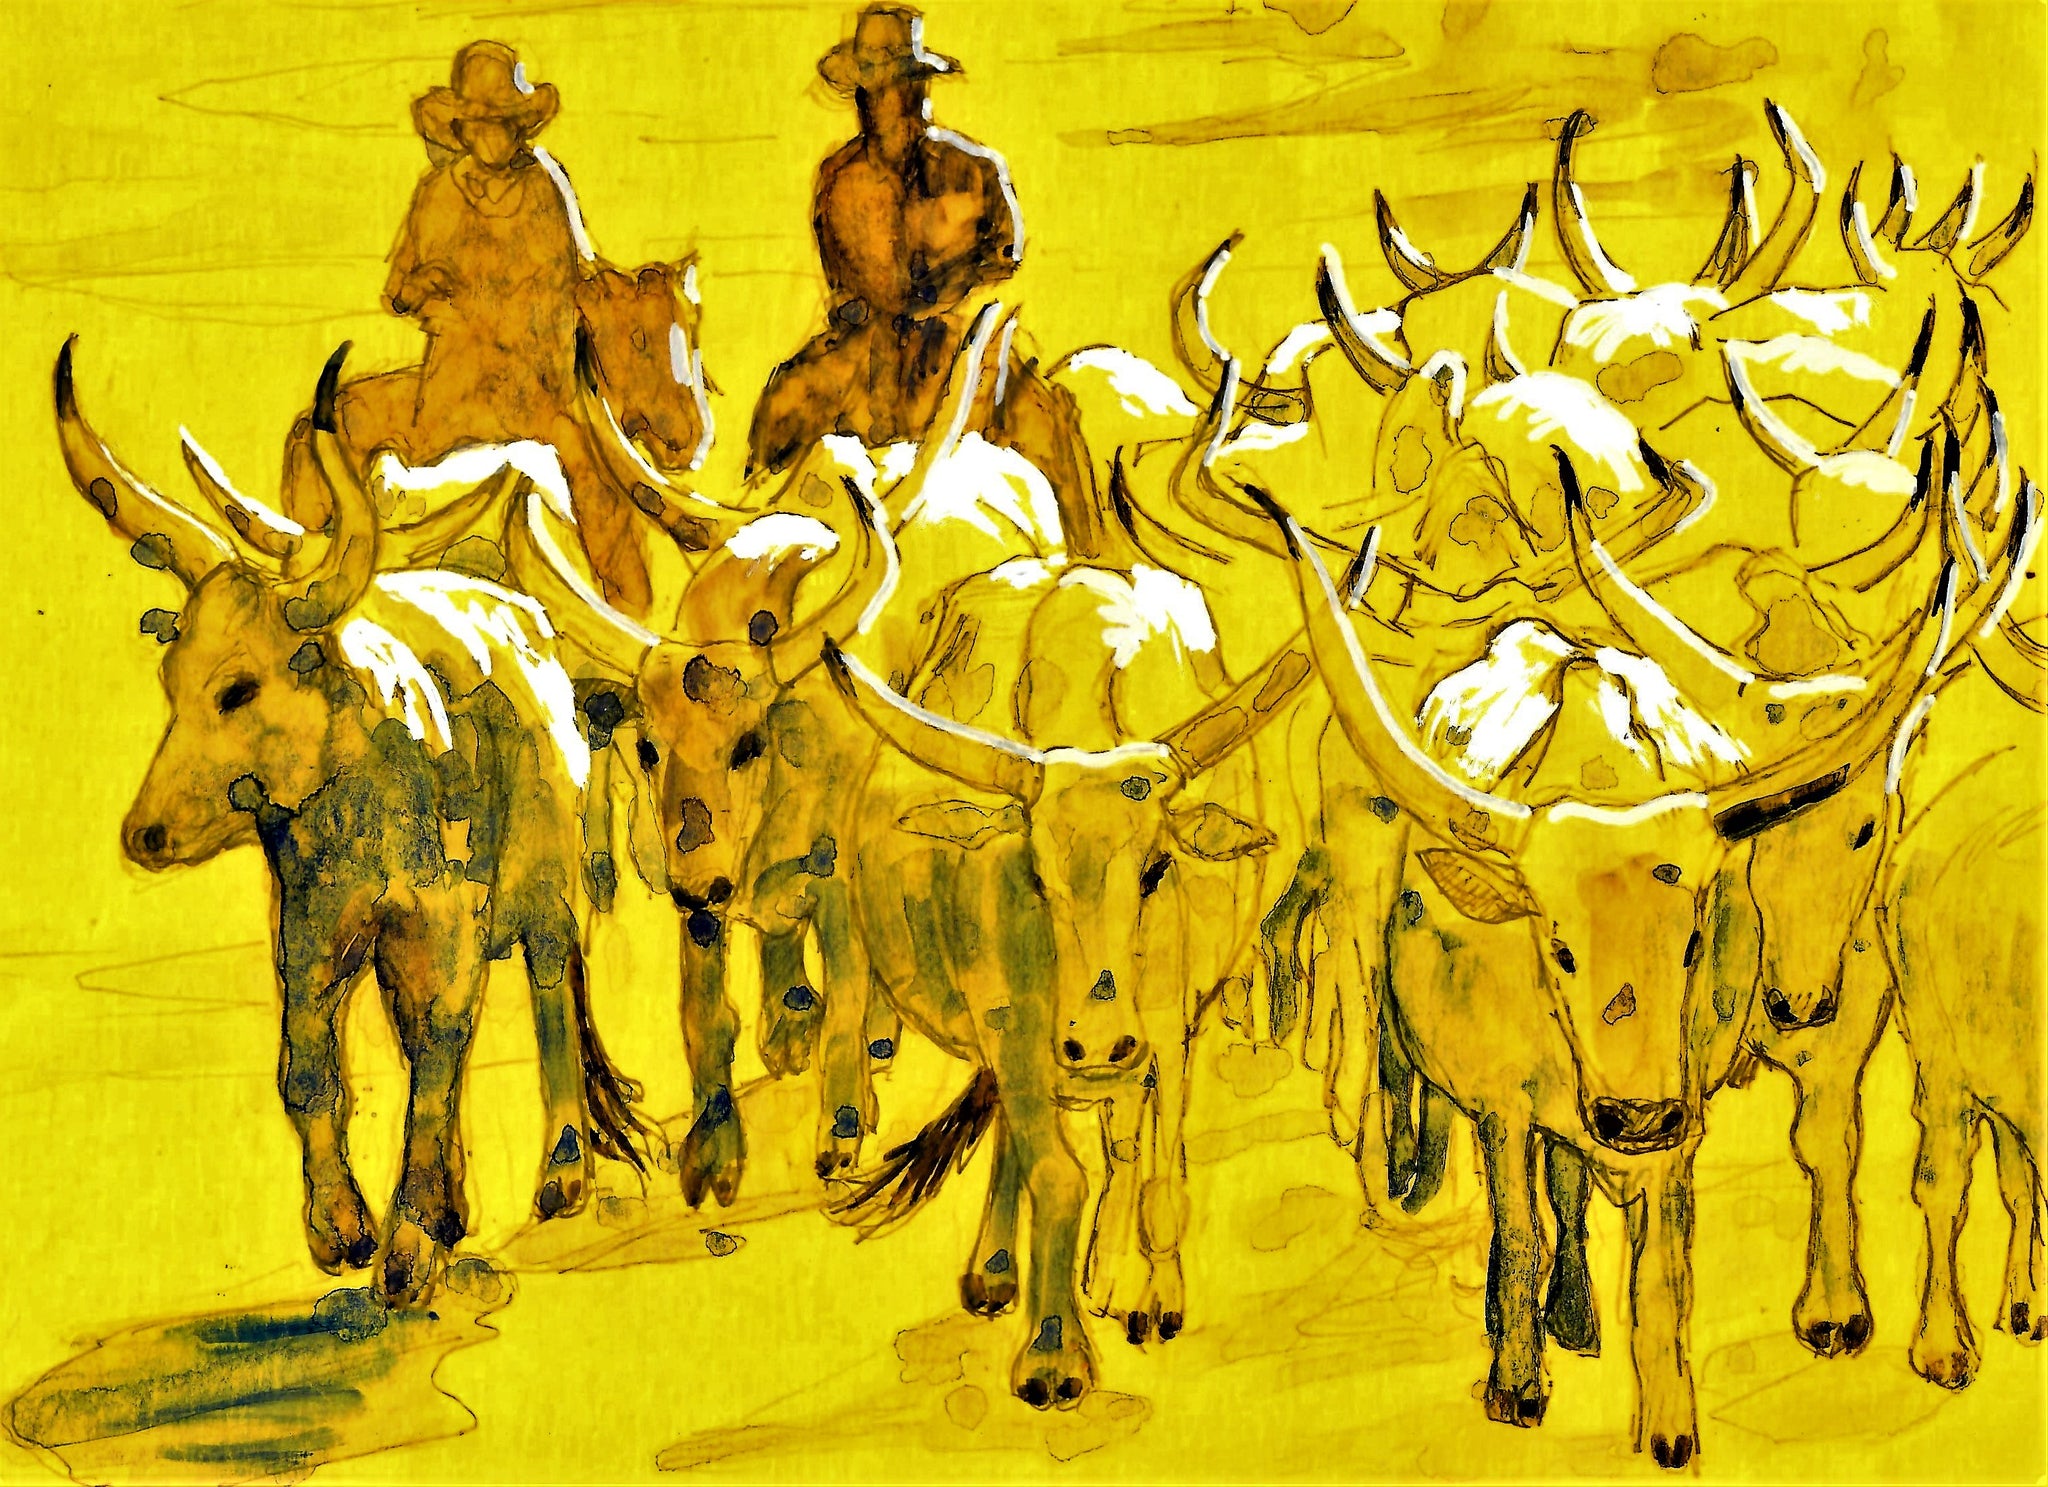 WESTERN - TWO COWBOYS AND THEIR LONGHORN CATTLE DRIVE AT SUNDOWN